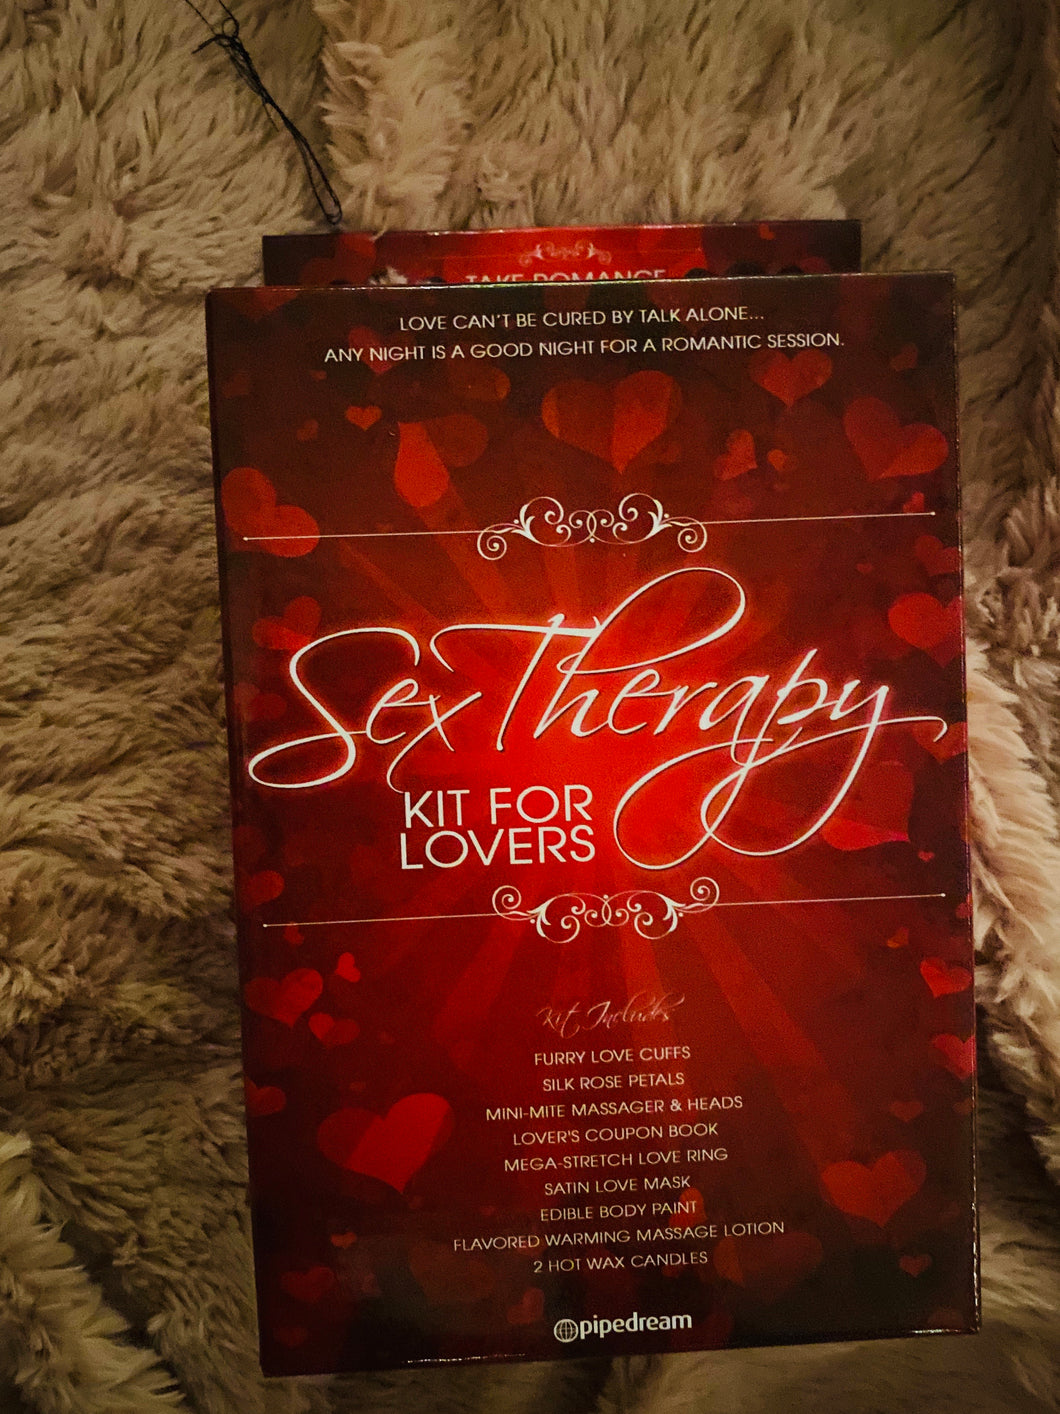 SEX THERAPY KIT FOR LOVERS